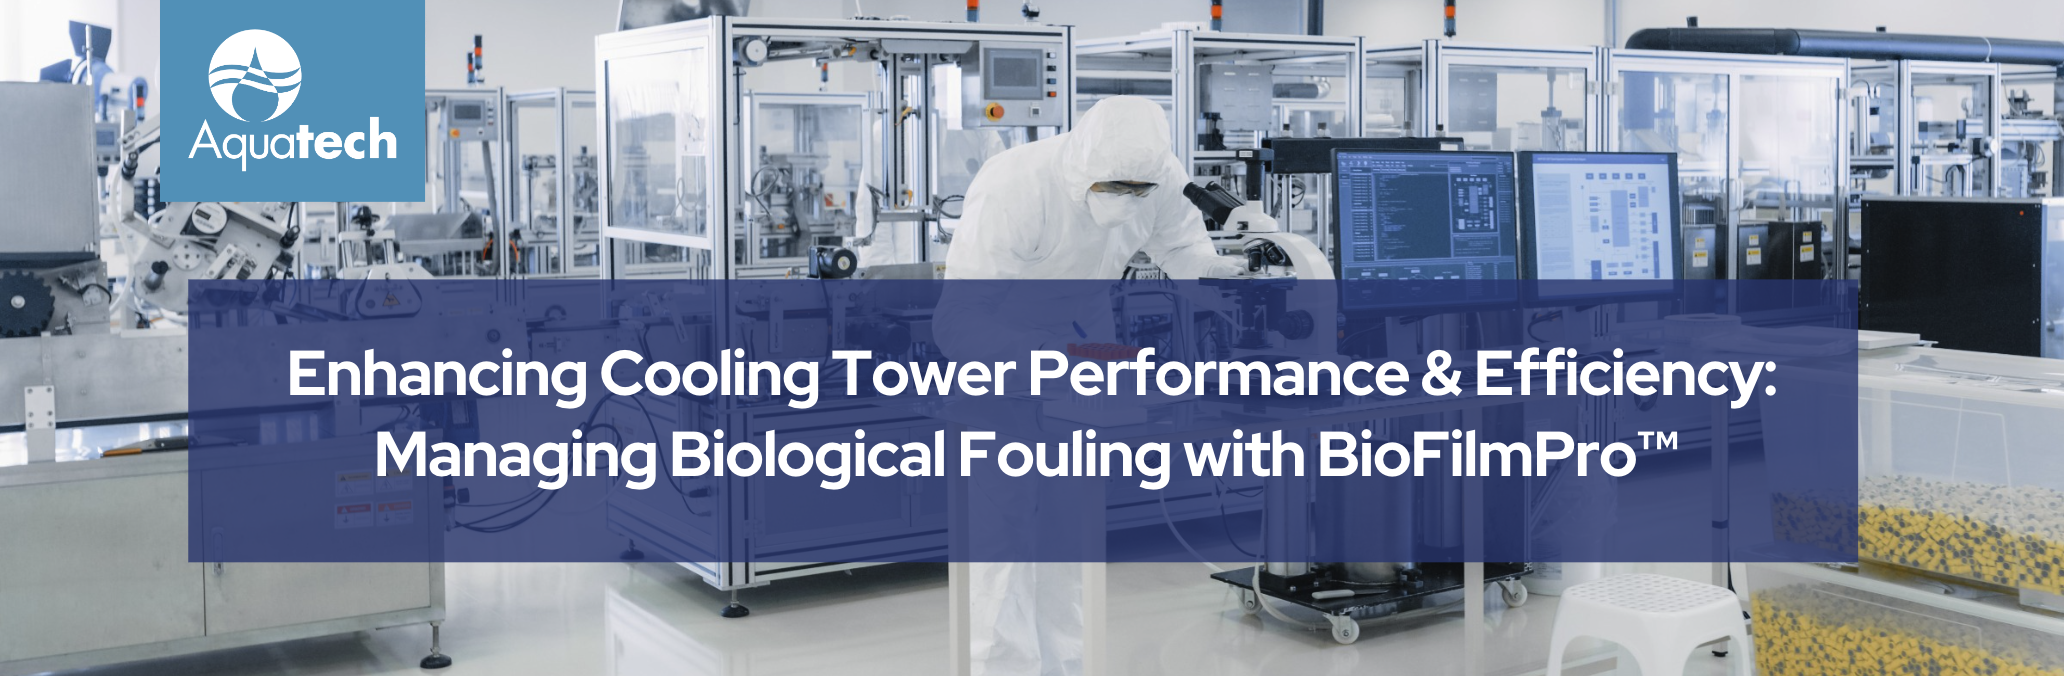 Case Study: Enhancing Cooling Tower Performance and Efficiency with BioFilmPro™